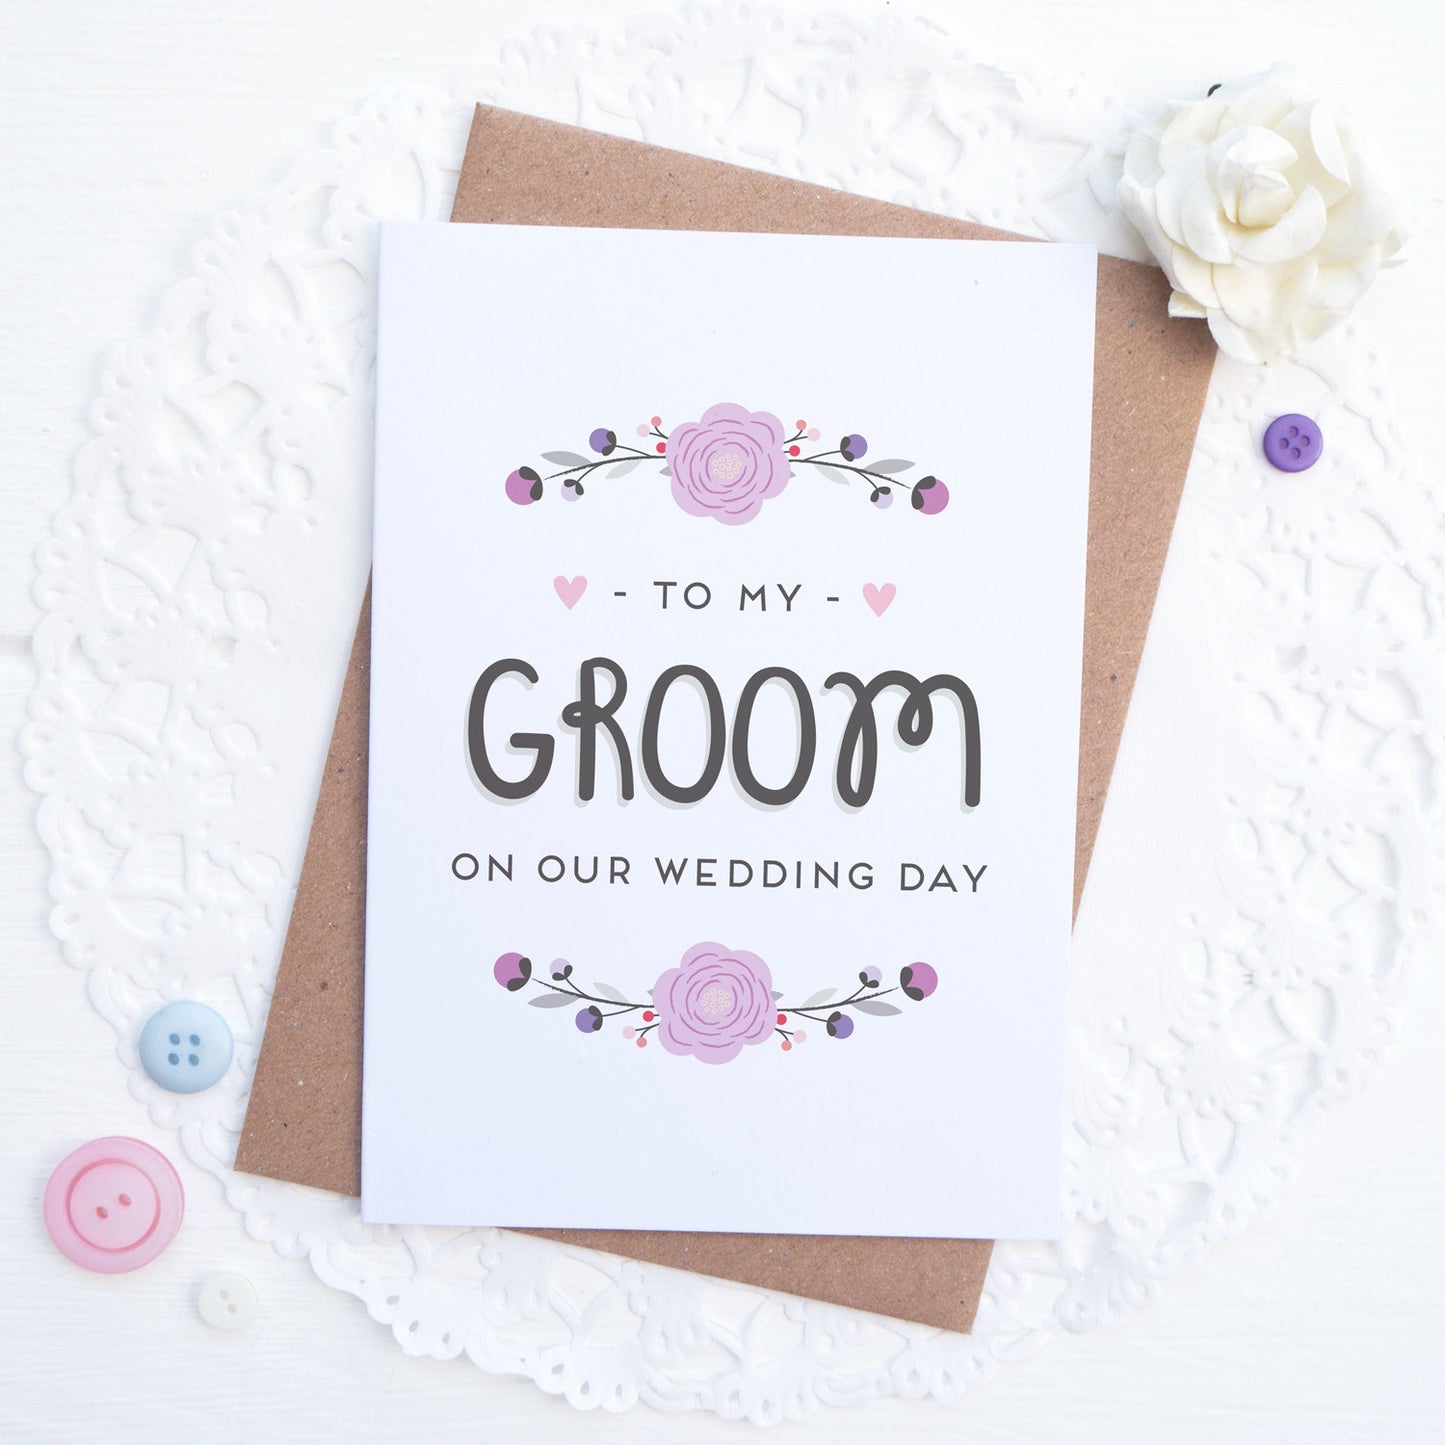 To my groom on our wedding day card in purple